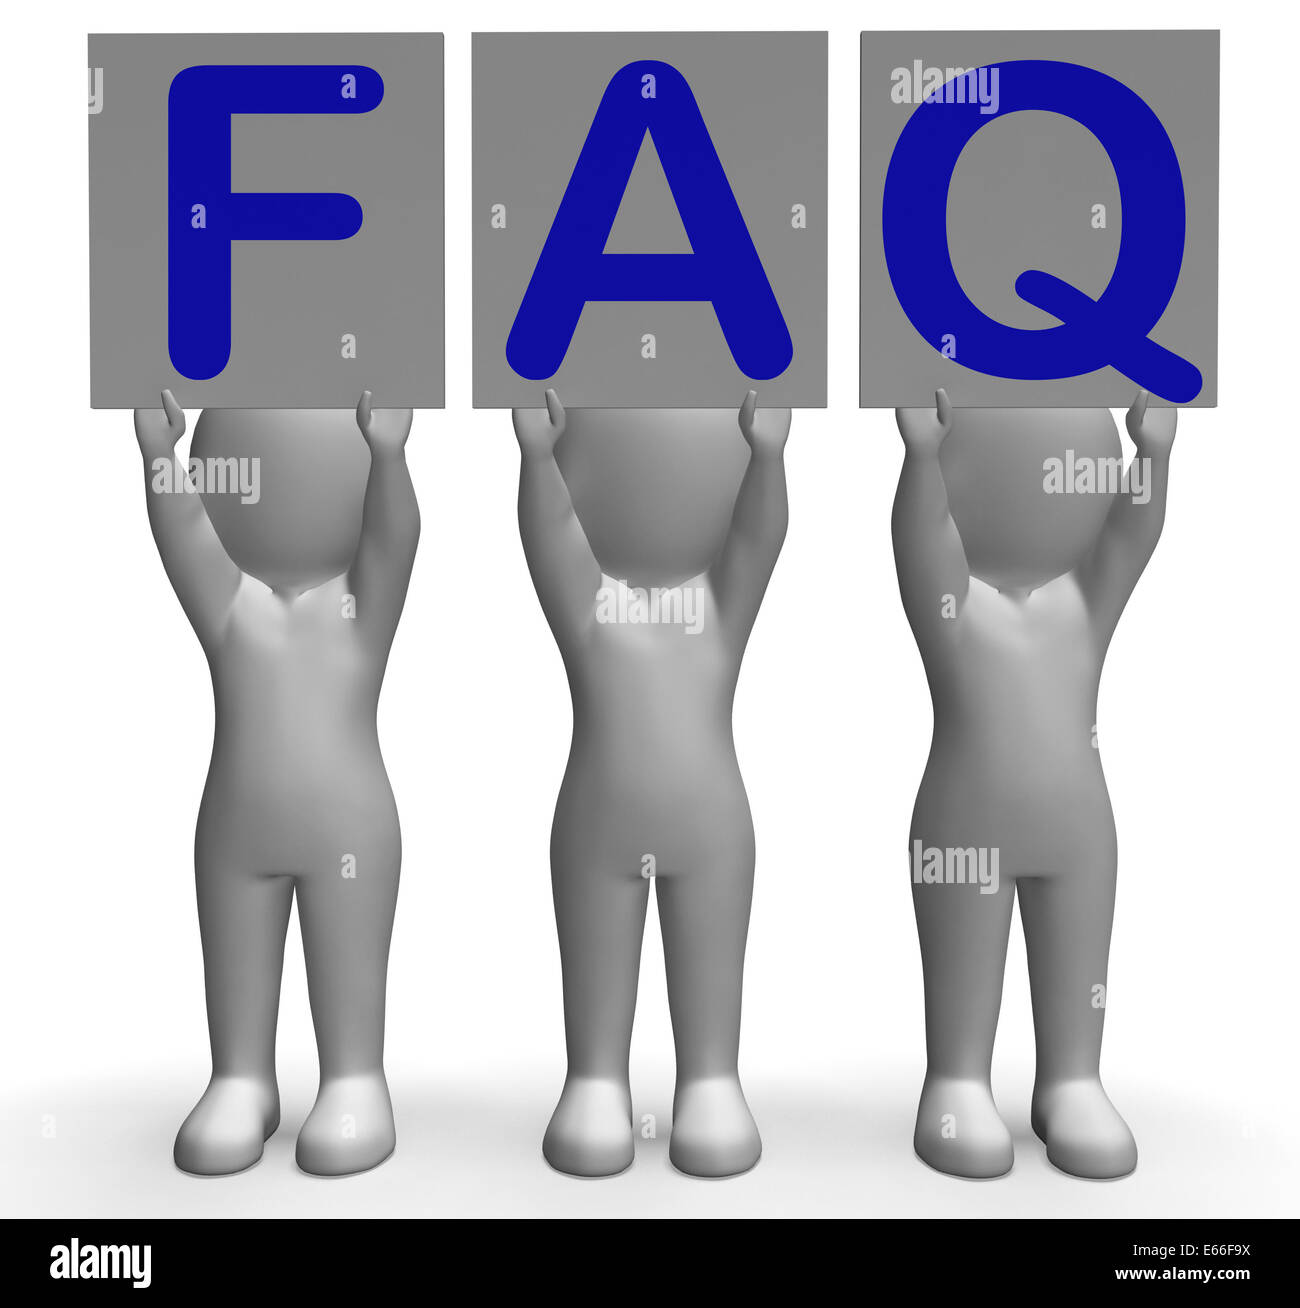 FAQ Banners Showing Frequent Assistance Help And Support Stock Photo